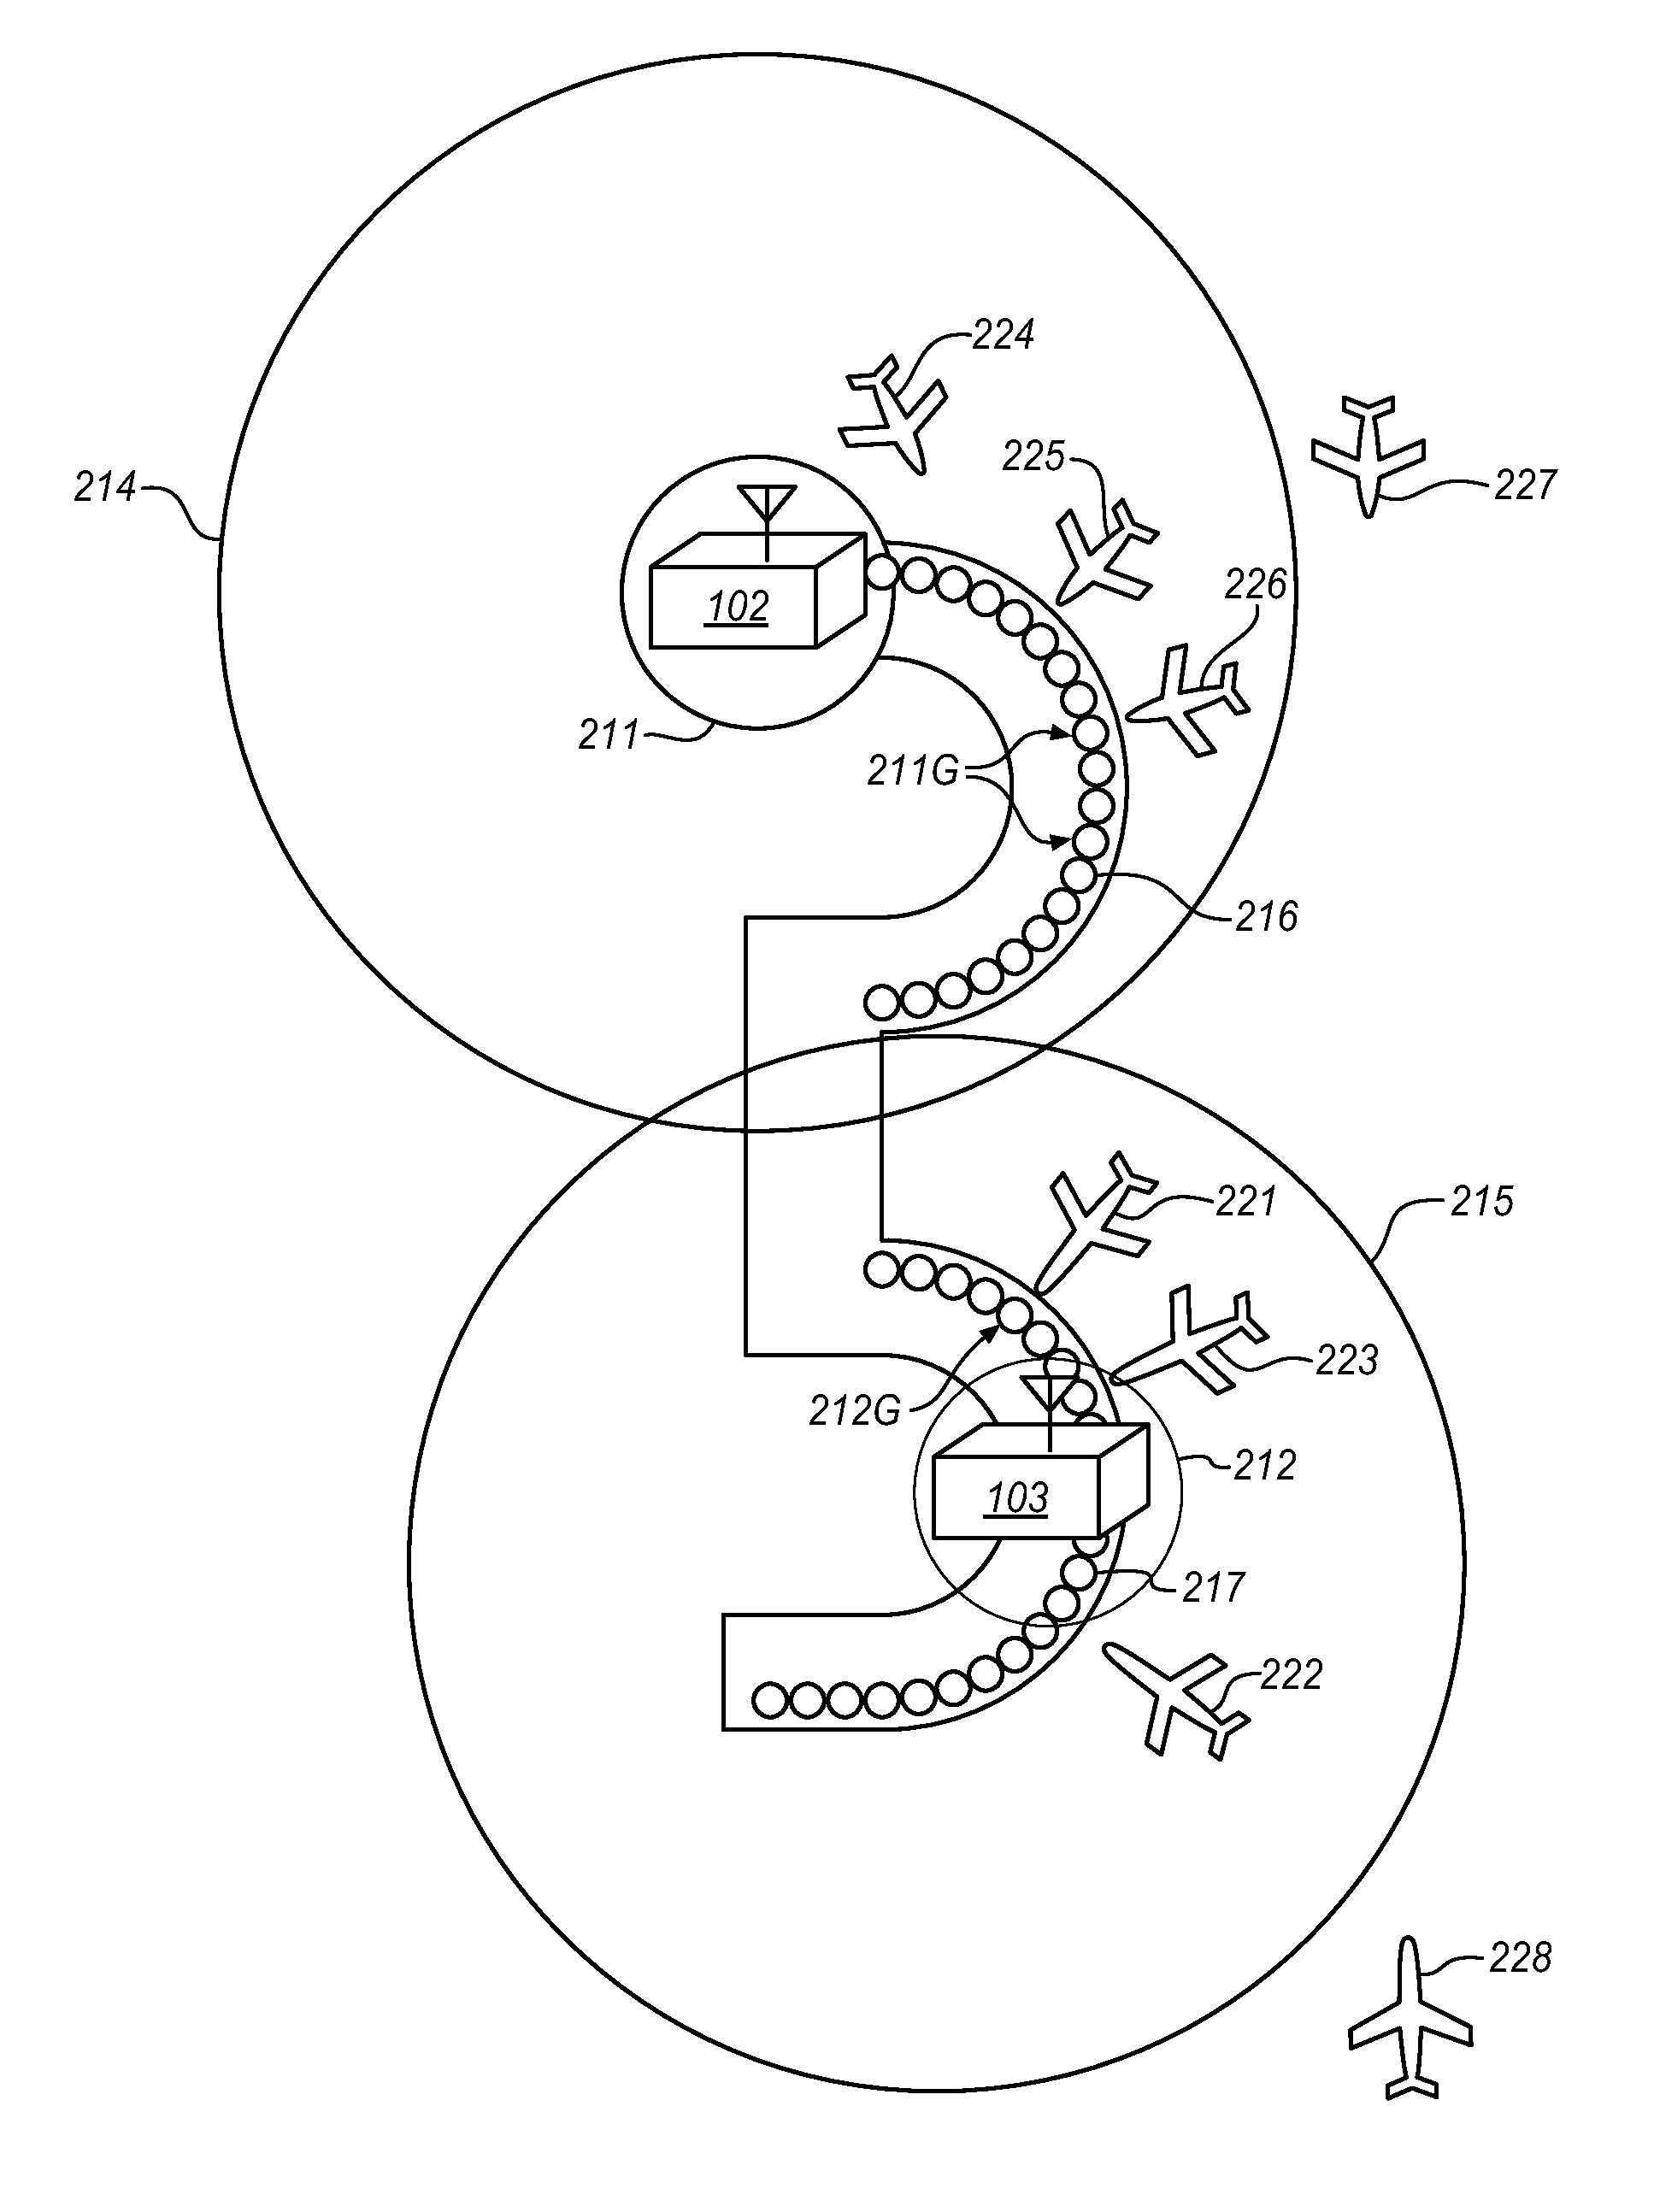 Mesh network based automated upload of content to aircraft